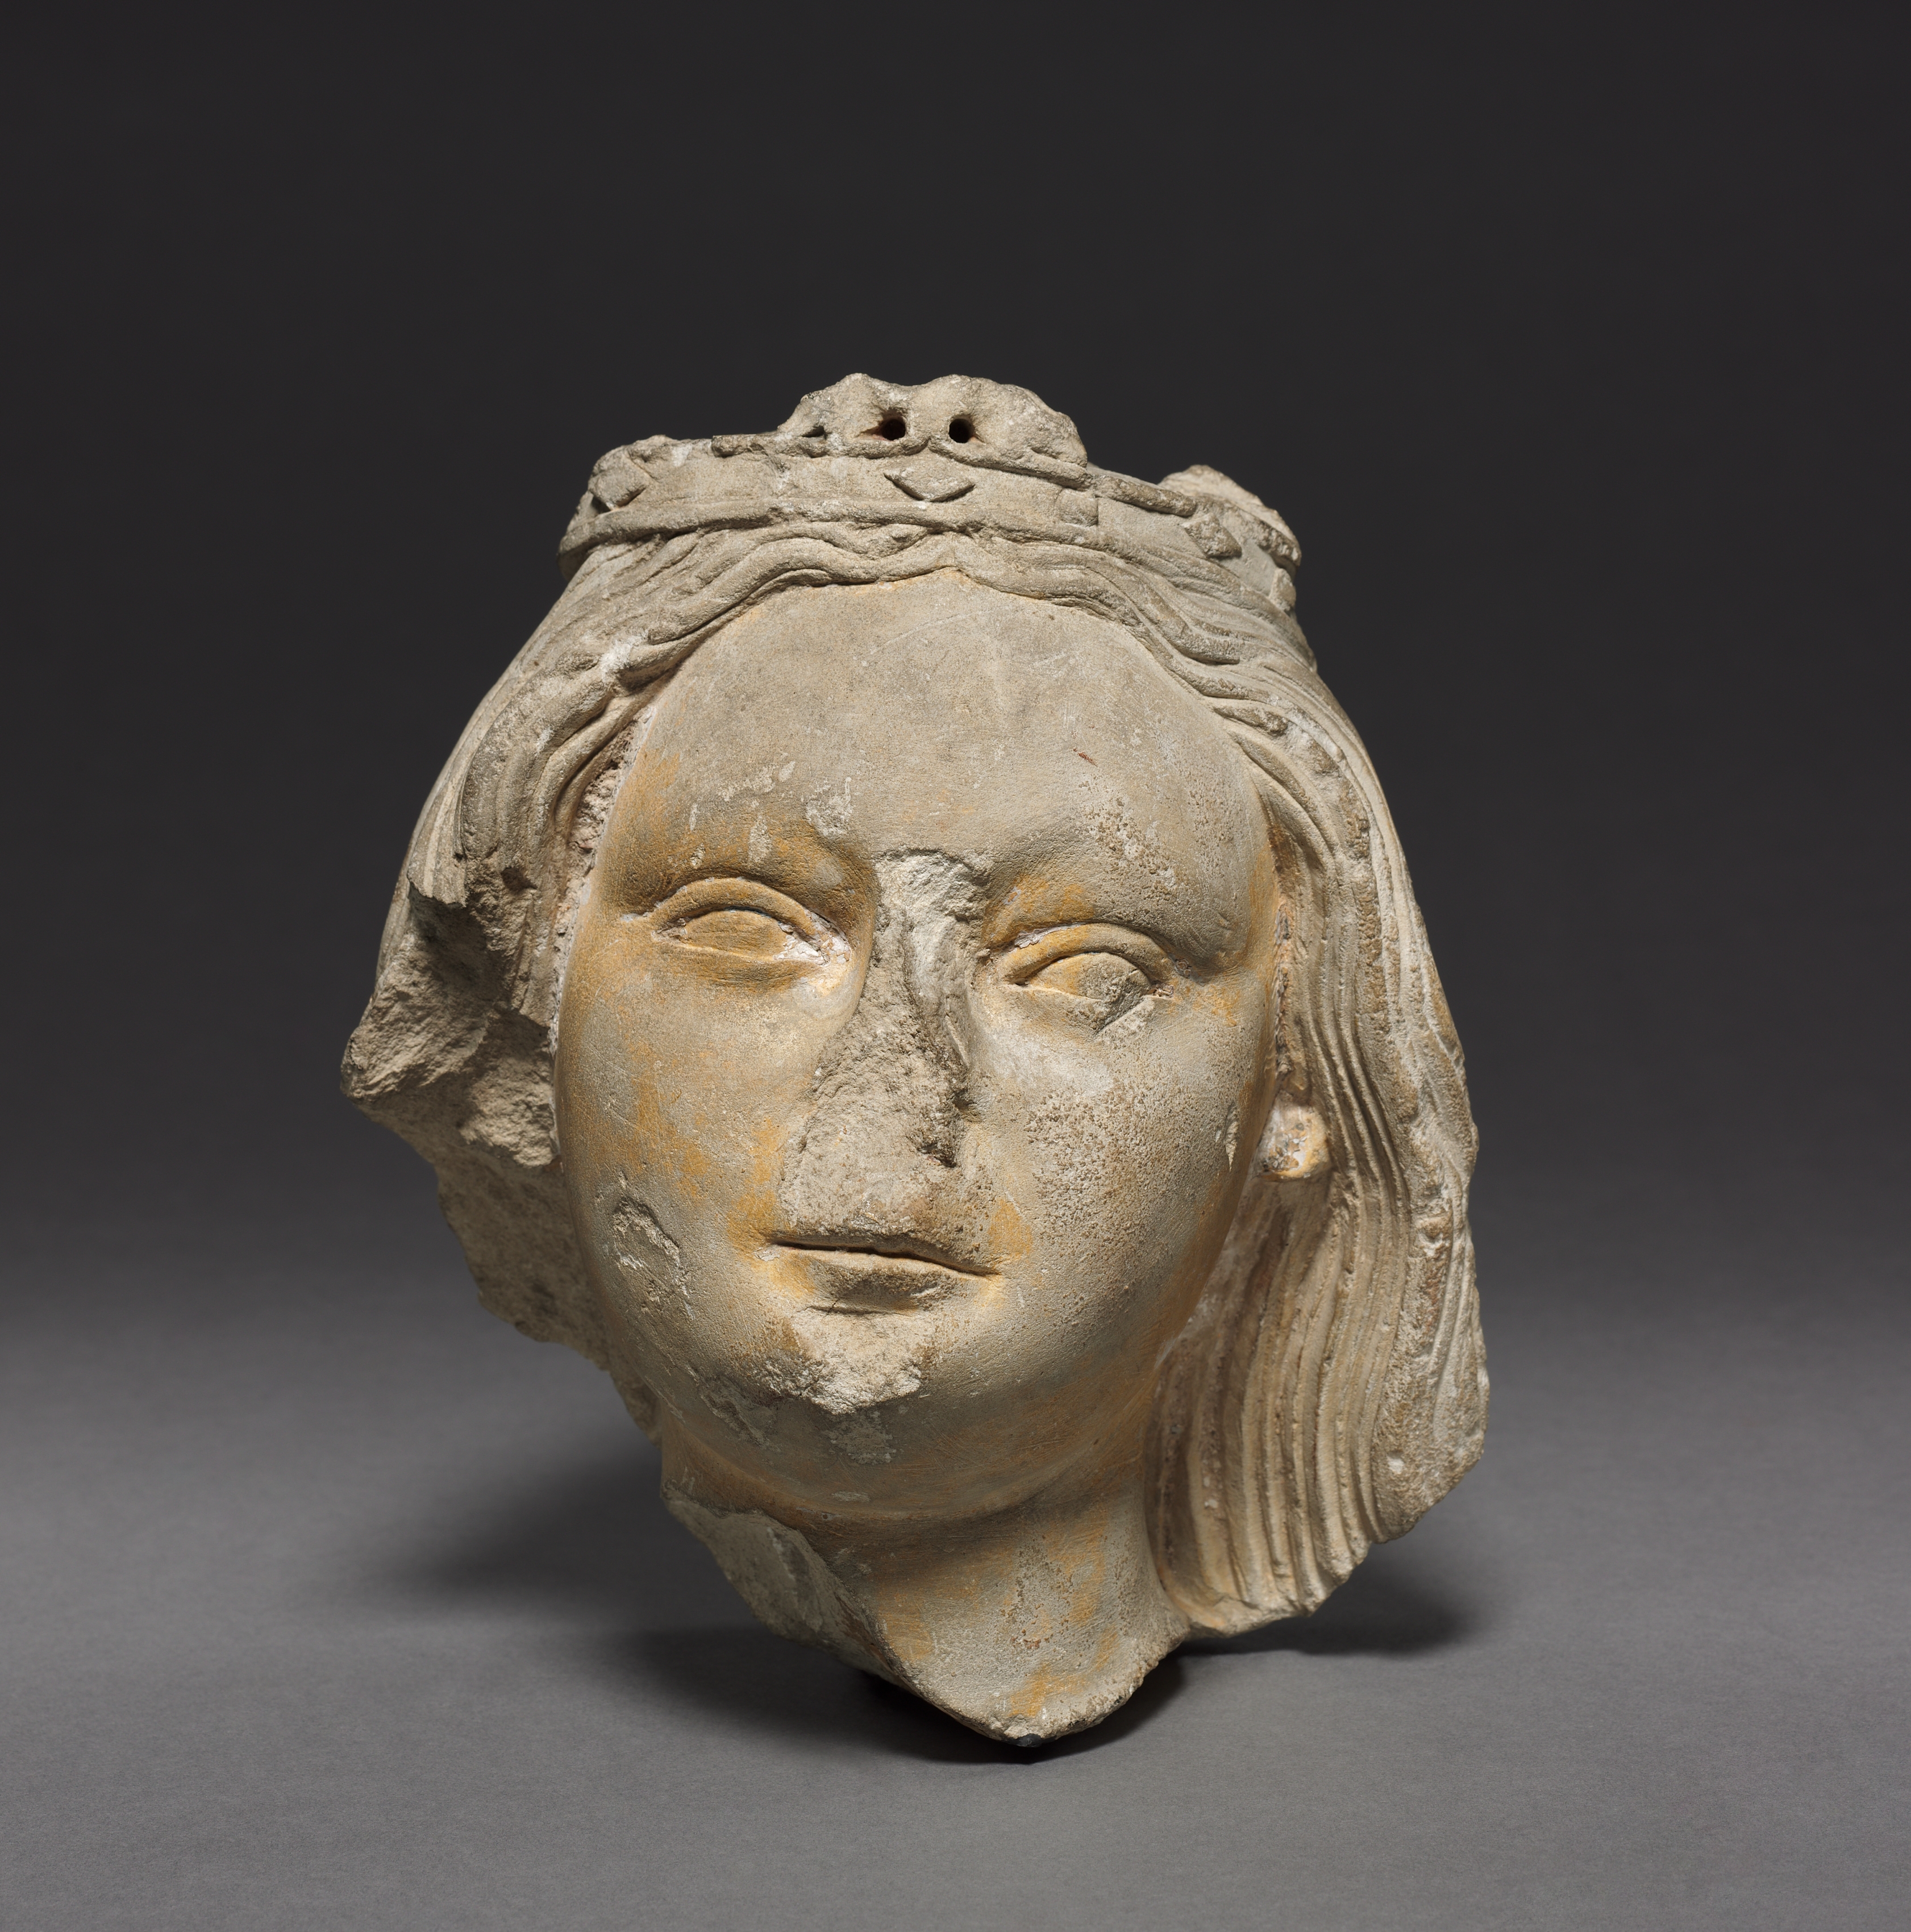 Crowned Female Head (Fragment)